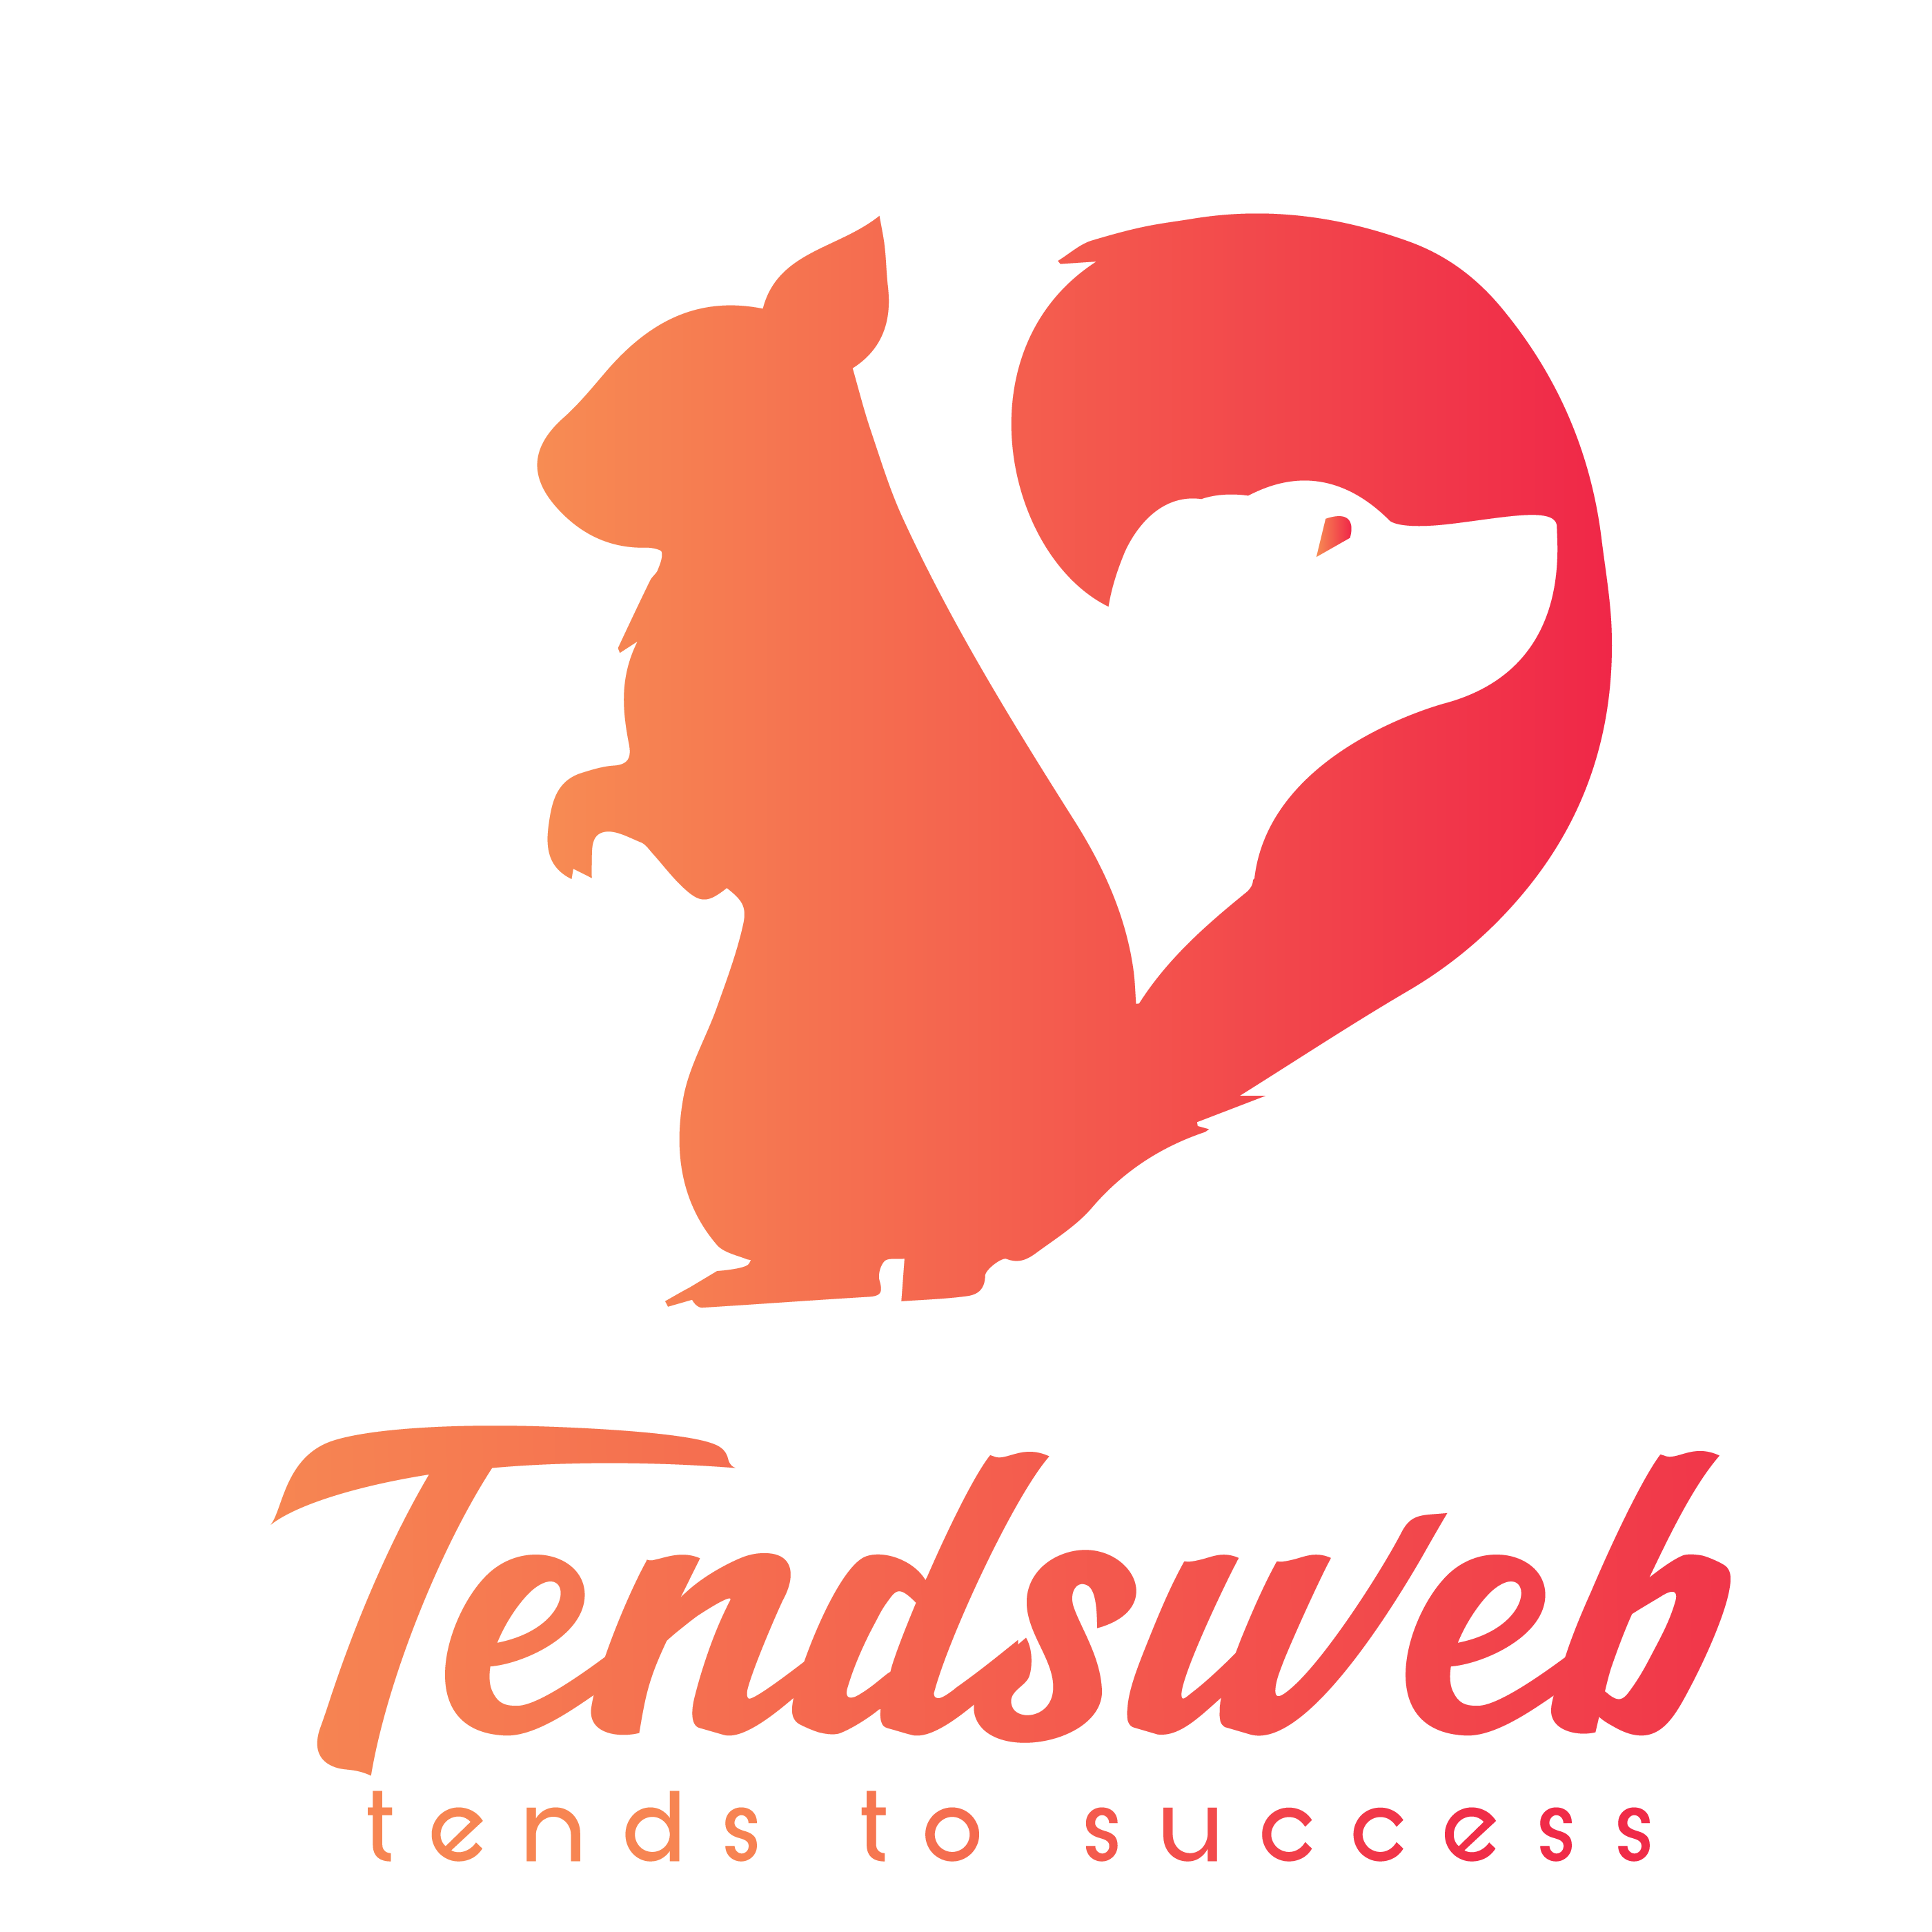 Tendsweb profile on Qualified.One